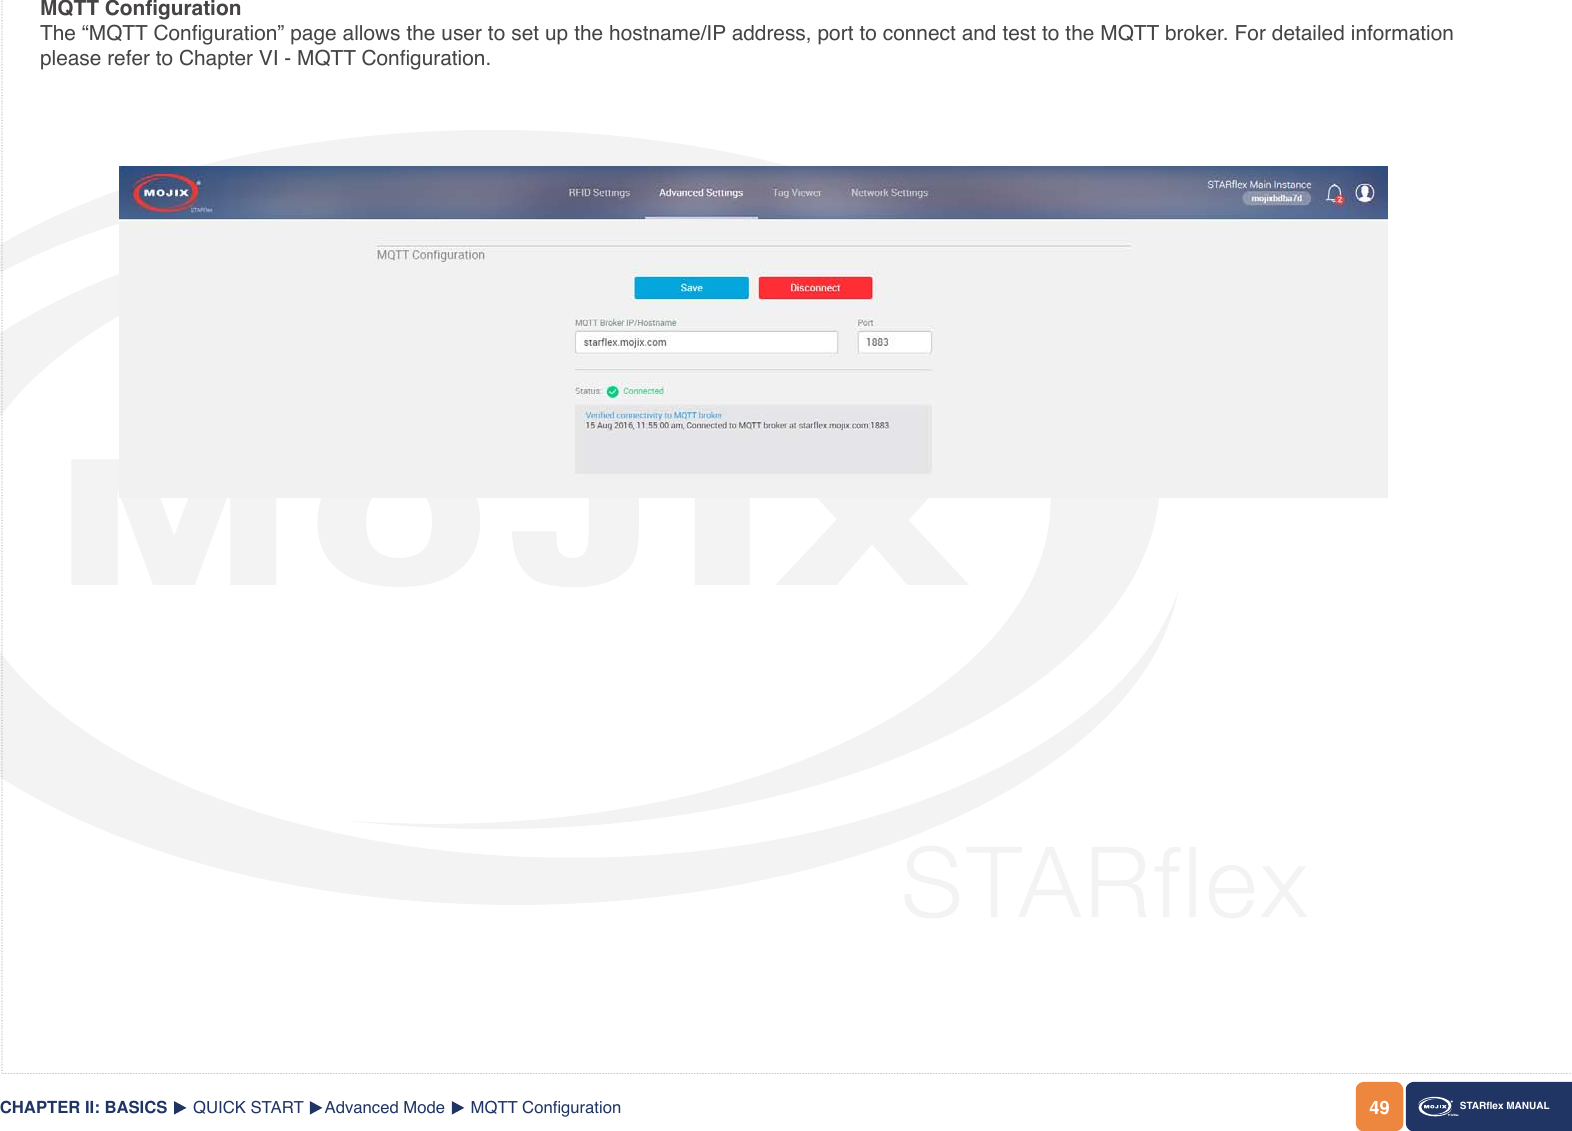 49CHAPTER II: BASICS STARex MANUALQUICK STARTMQTT CongurationThe “MQTT Conguration” page allows the user to set up the hostname/IP address, port to connect and test to the MQTT broker. For detailed information please refer to Chapter VI - MQTT Conguration.Advanced Mode MQTT Conguration